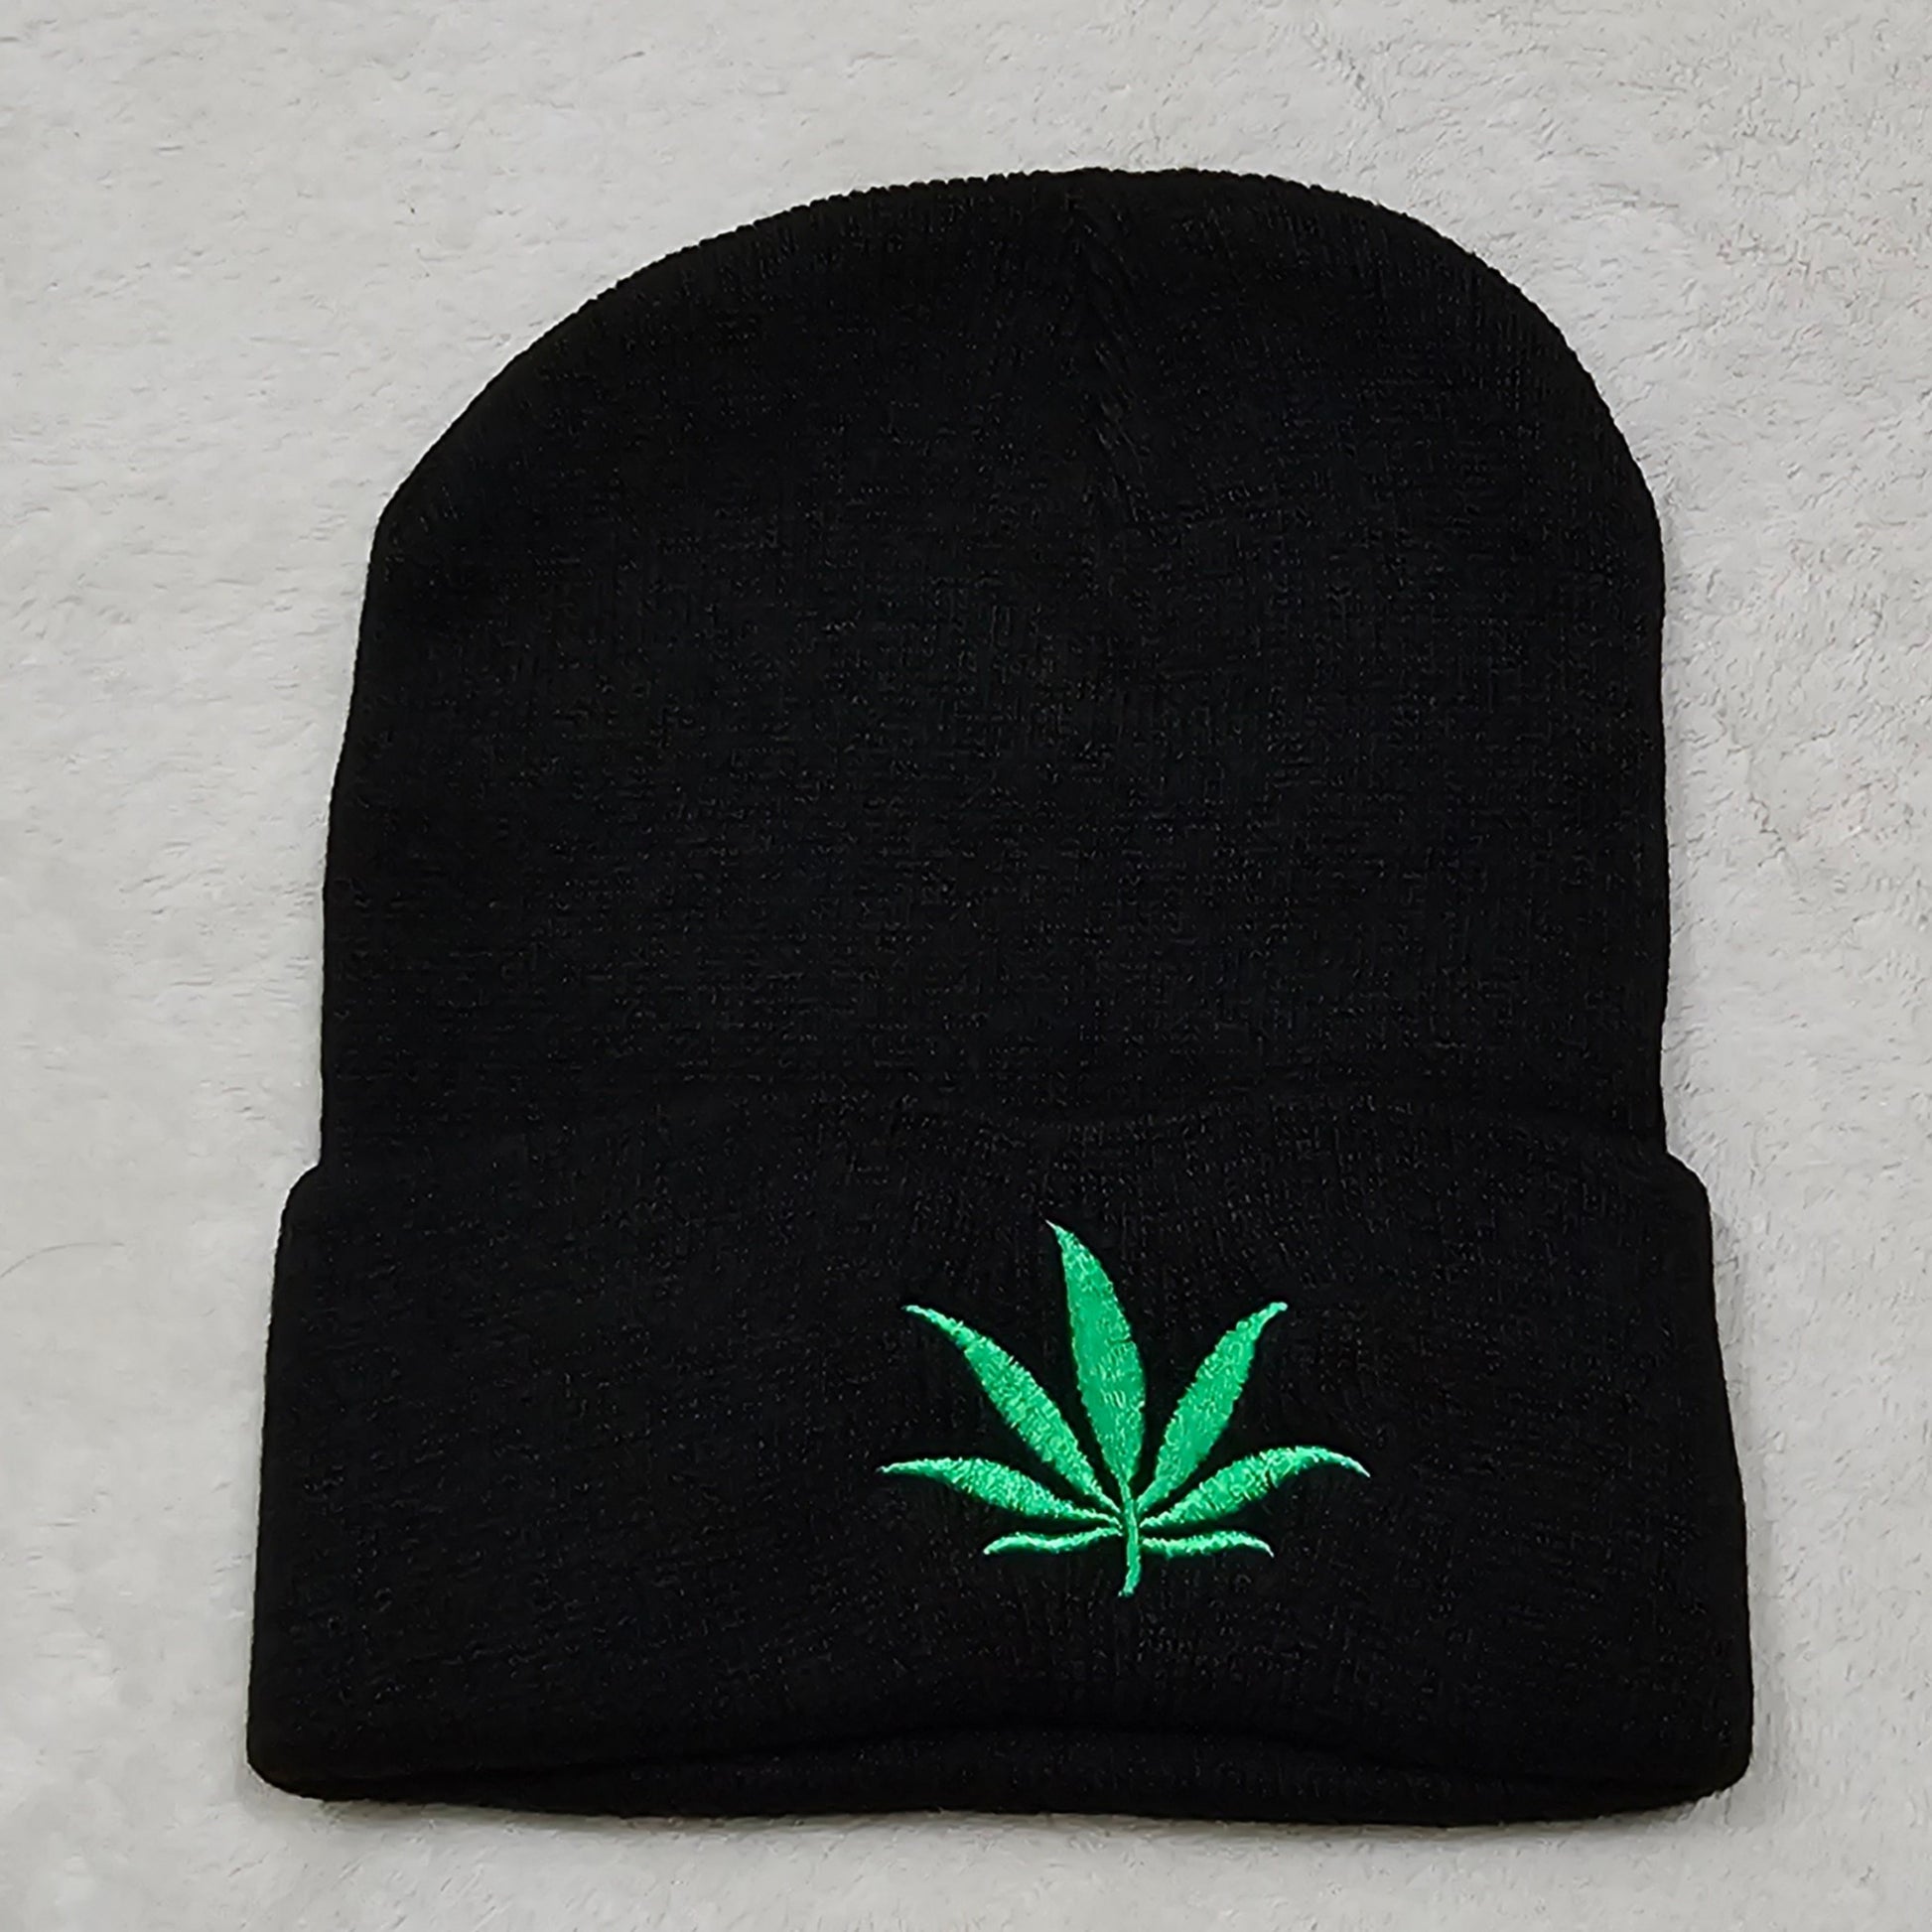 Unisex Embroidered Weed Leaf Beanie | Solid Black with Green Pot Leaf at Front - A Gothic Universe - Beanies